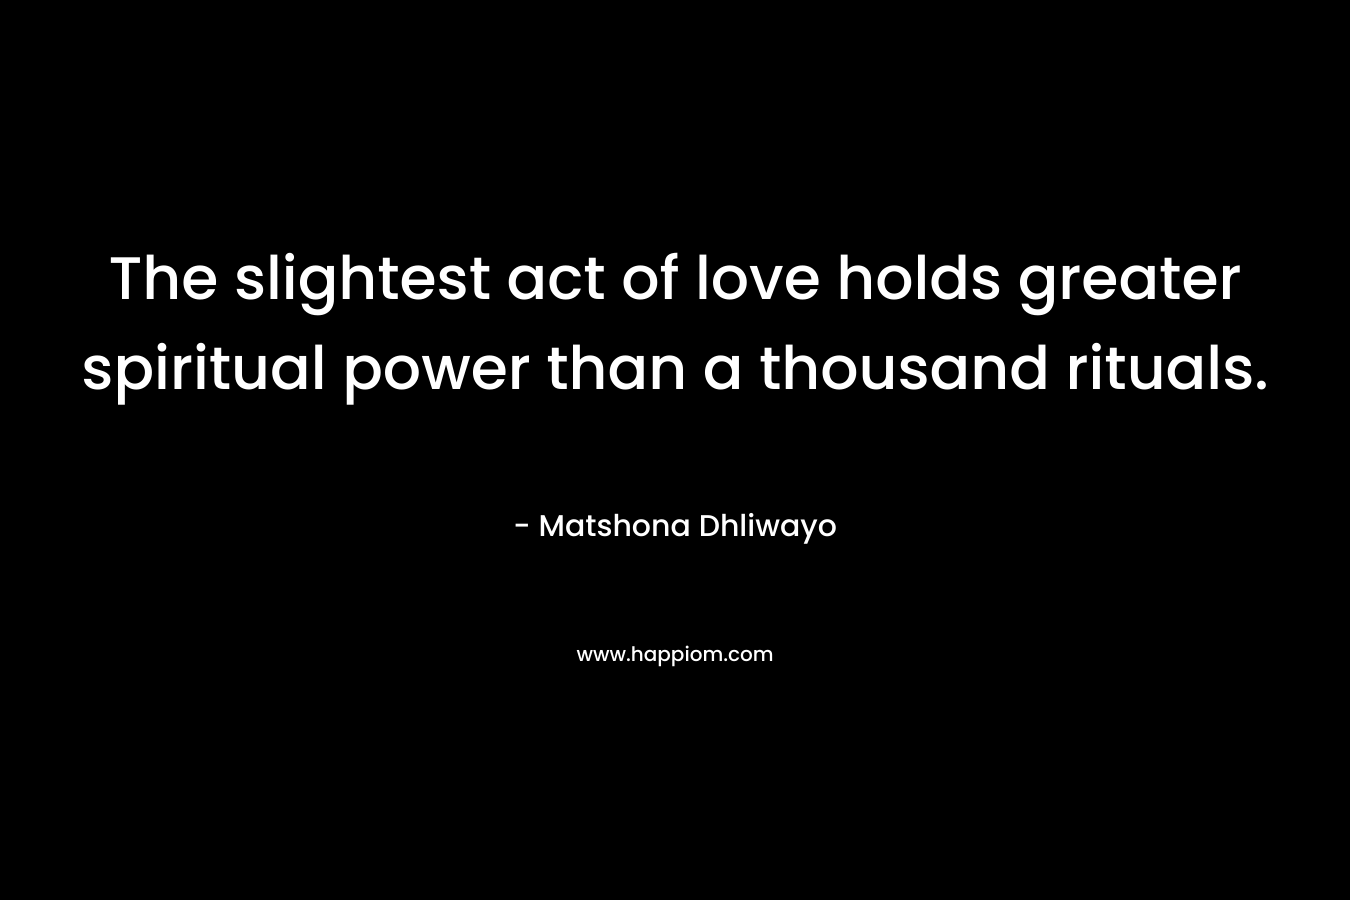 The slightest act of love holds greater spiritual power than a thousand rituals. – Matshona Dhliwayo